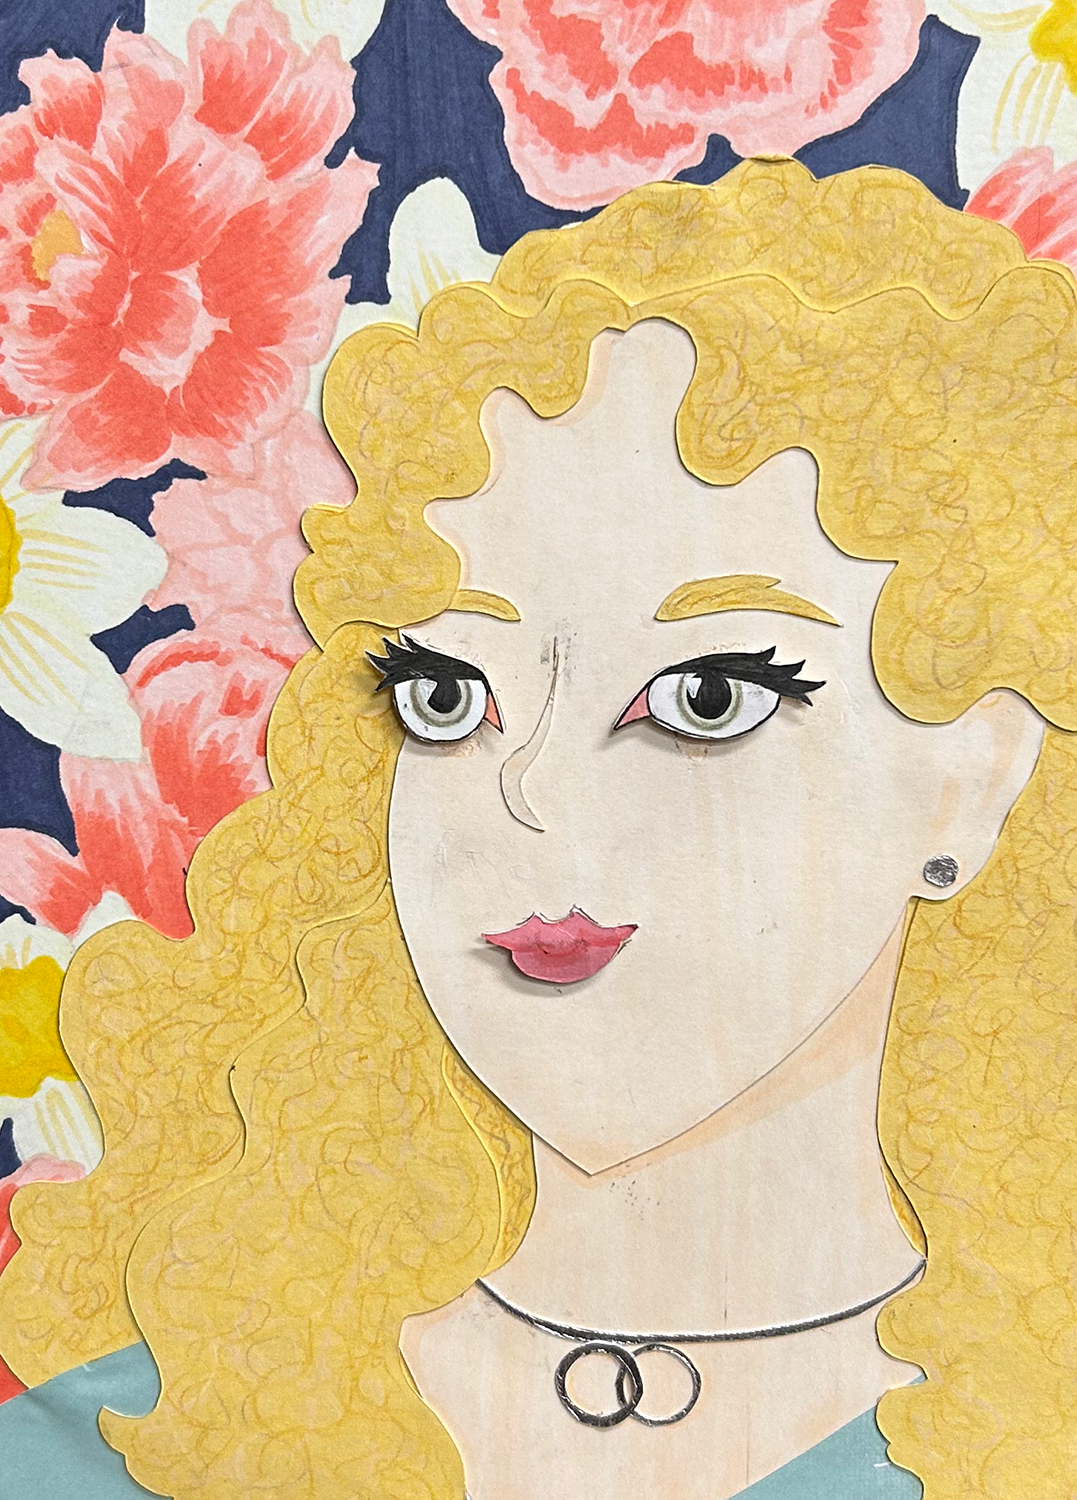 Close-up image of cut-paper portrait of a blonde girl with green eyes. She wears a turquoise shirt and silver jewelry and is place on a dark blue background filled with drawn daffodils and peonies.